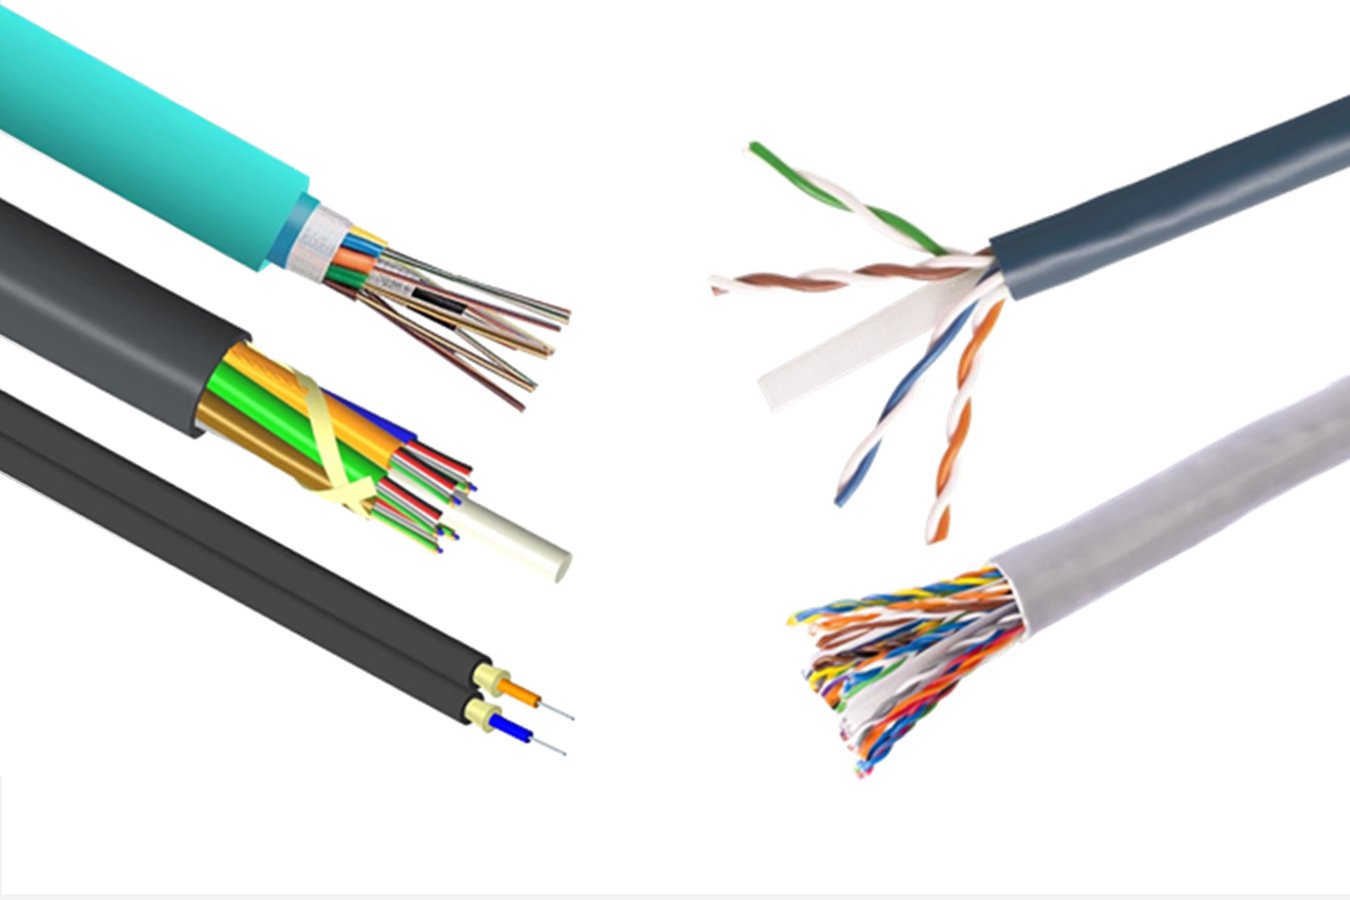 Buy Dependable Wholesale thin diameter braided wire 